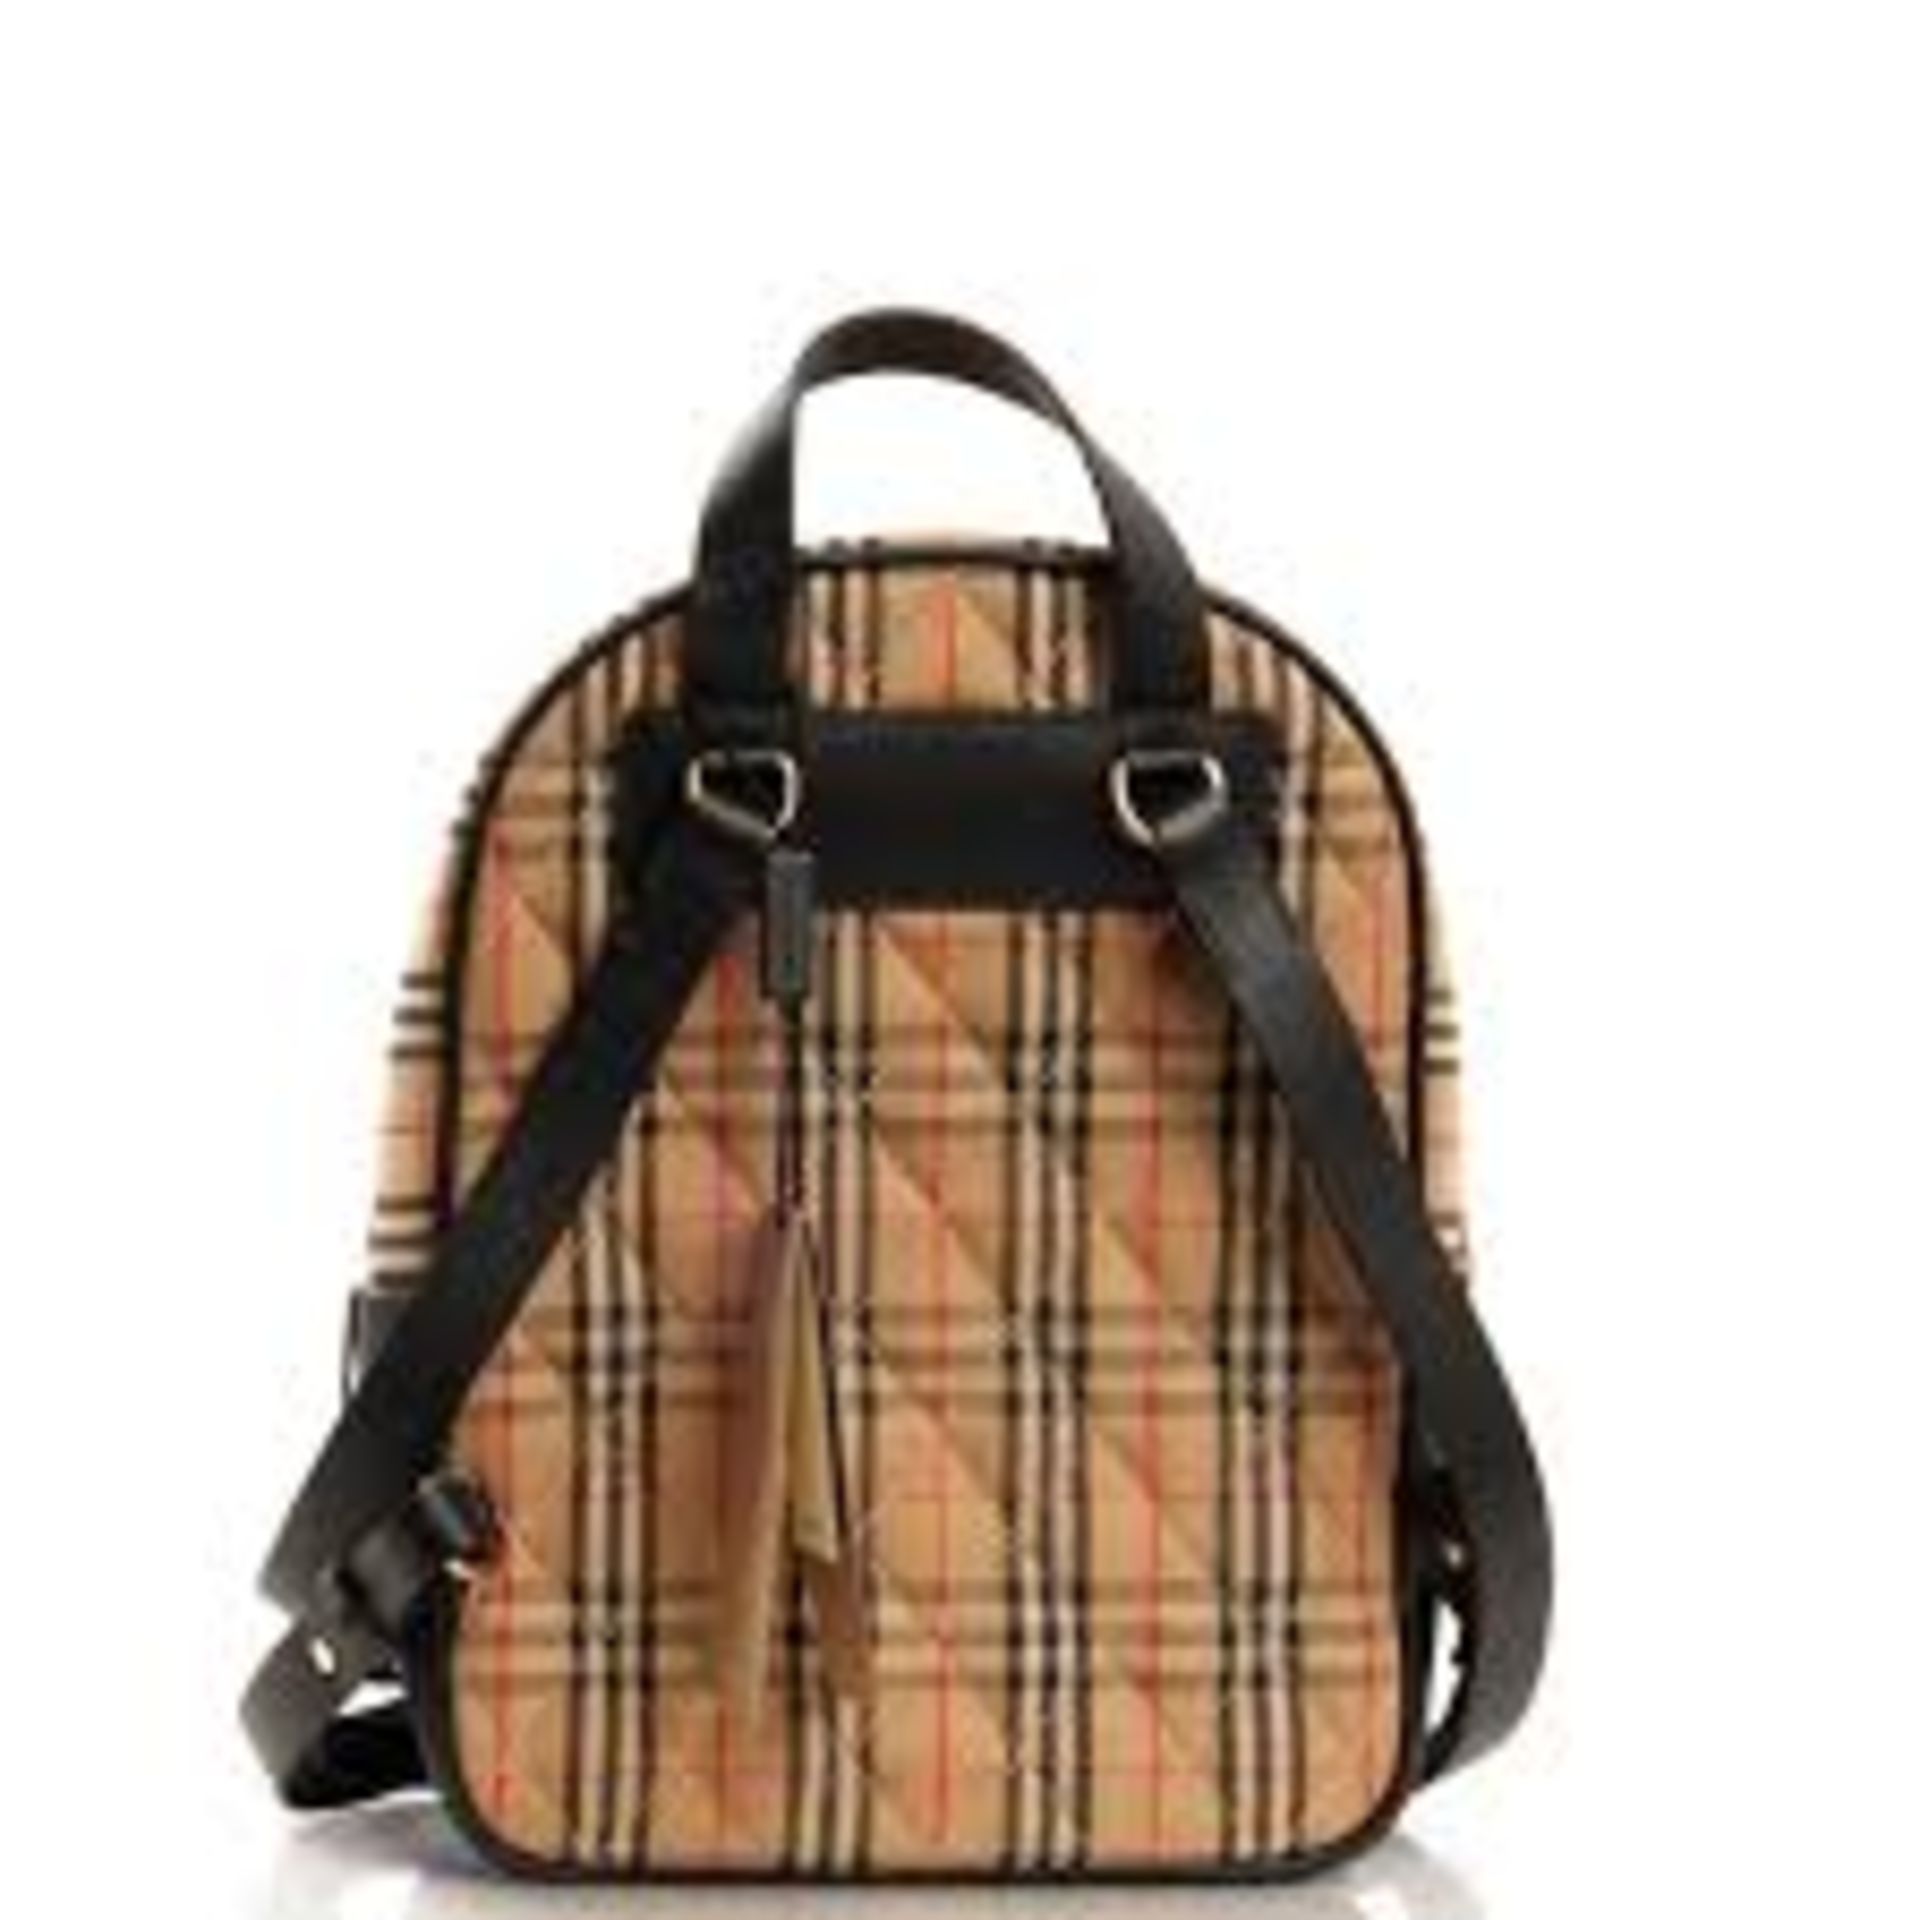 Burberry Link Backpack in Nova Check. 20x25cm. - Image 2 of 10